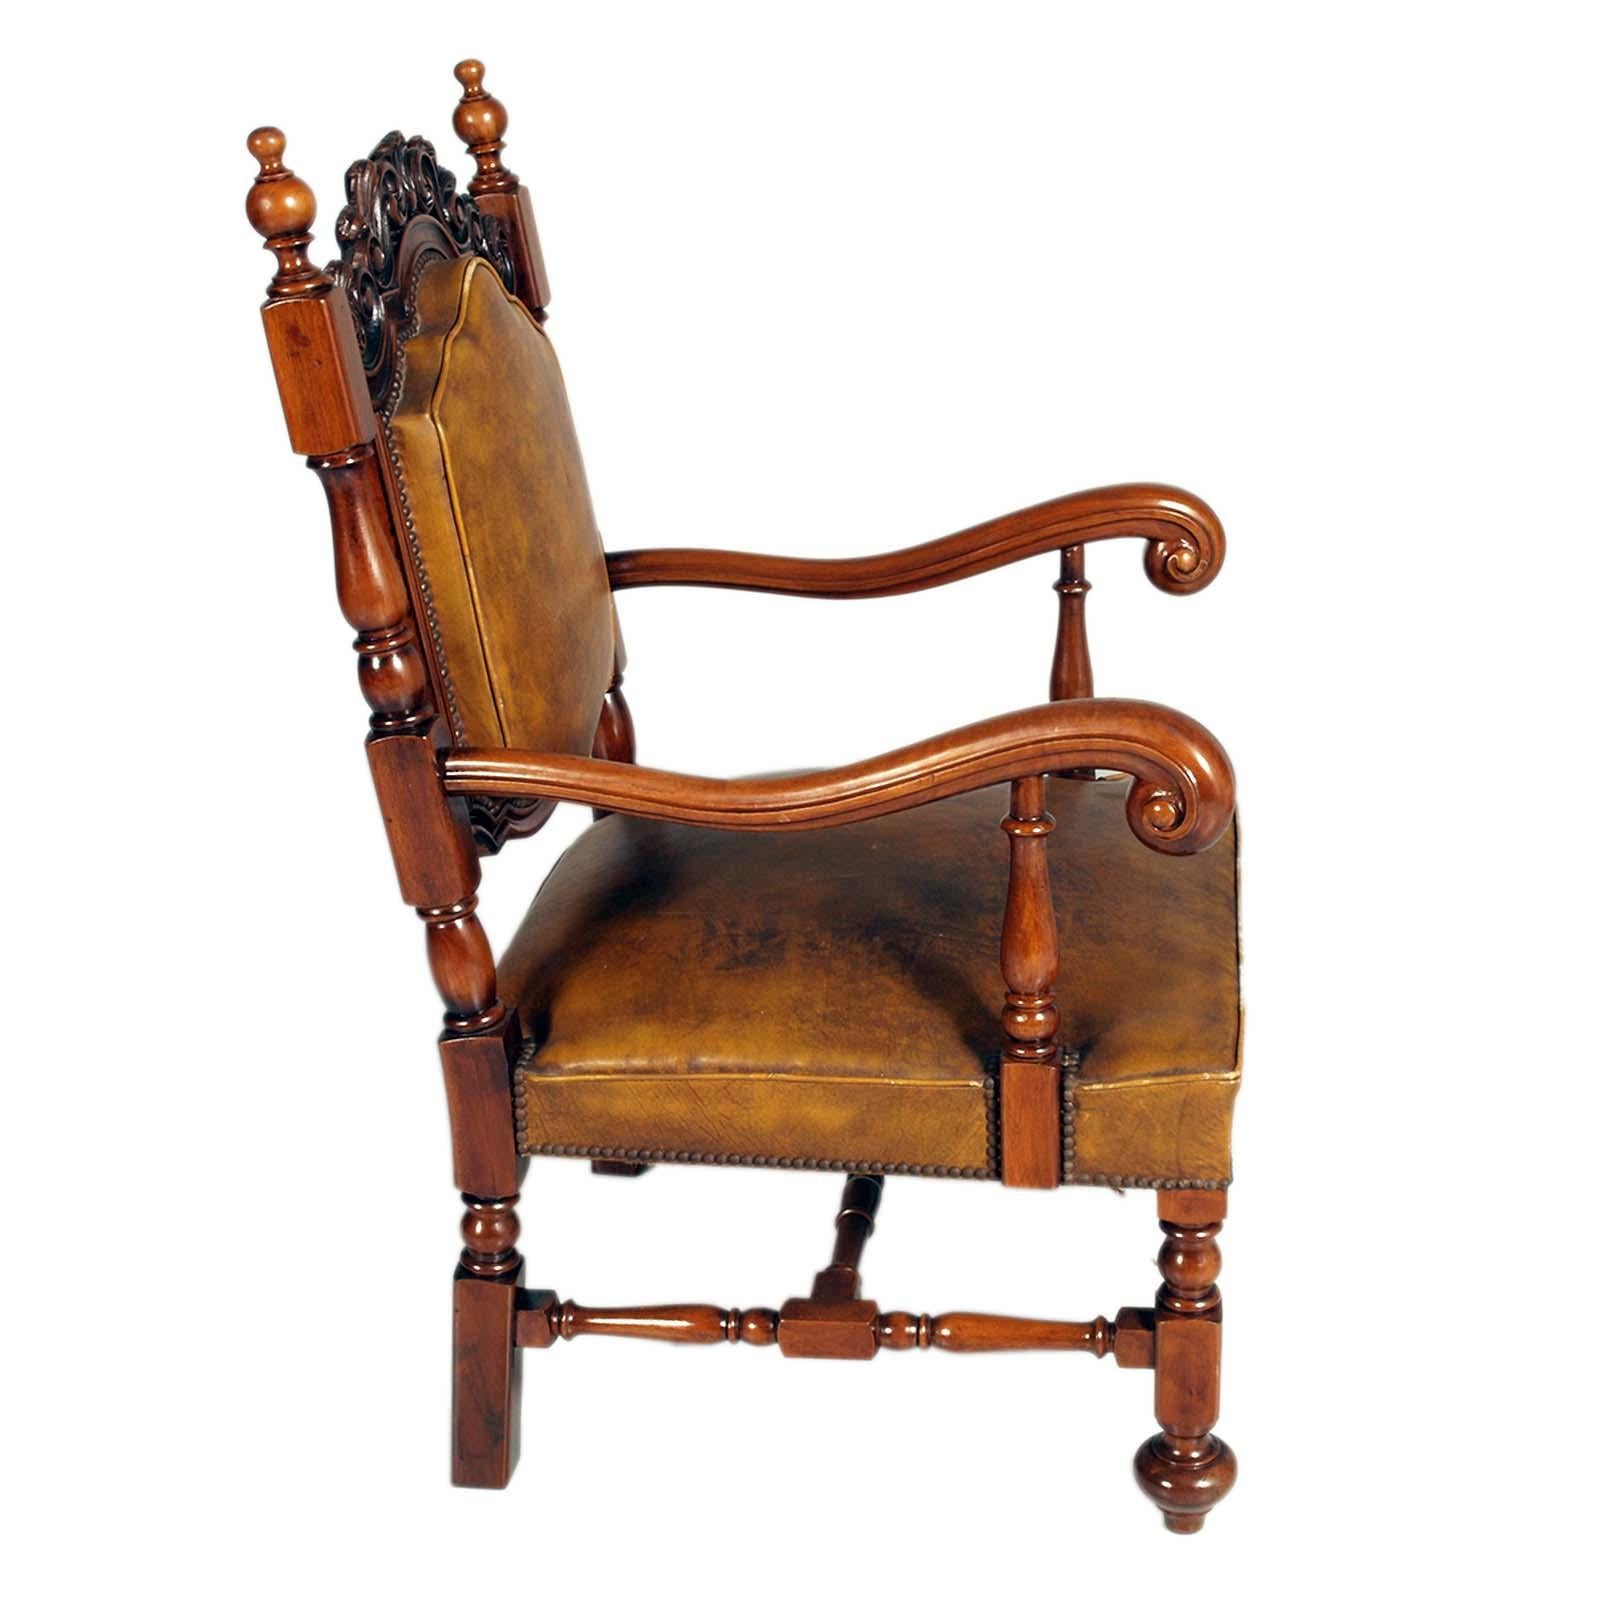 Venice 19th Century Throne Chair attributed to Testolini Frères Venice ,Leather Upholstery, wax polished

About Testolini Frères Venise
Testolini Brothers saw its birth as a carpentry-cabinetmaking company; its owners were not ordinary personalities